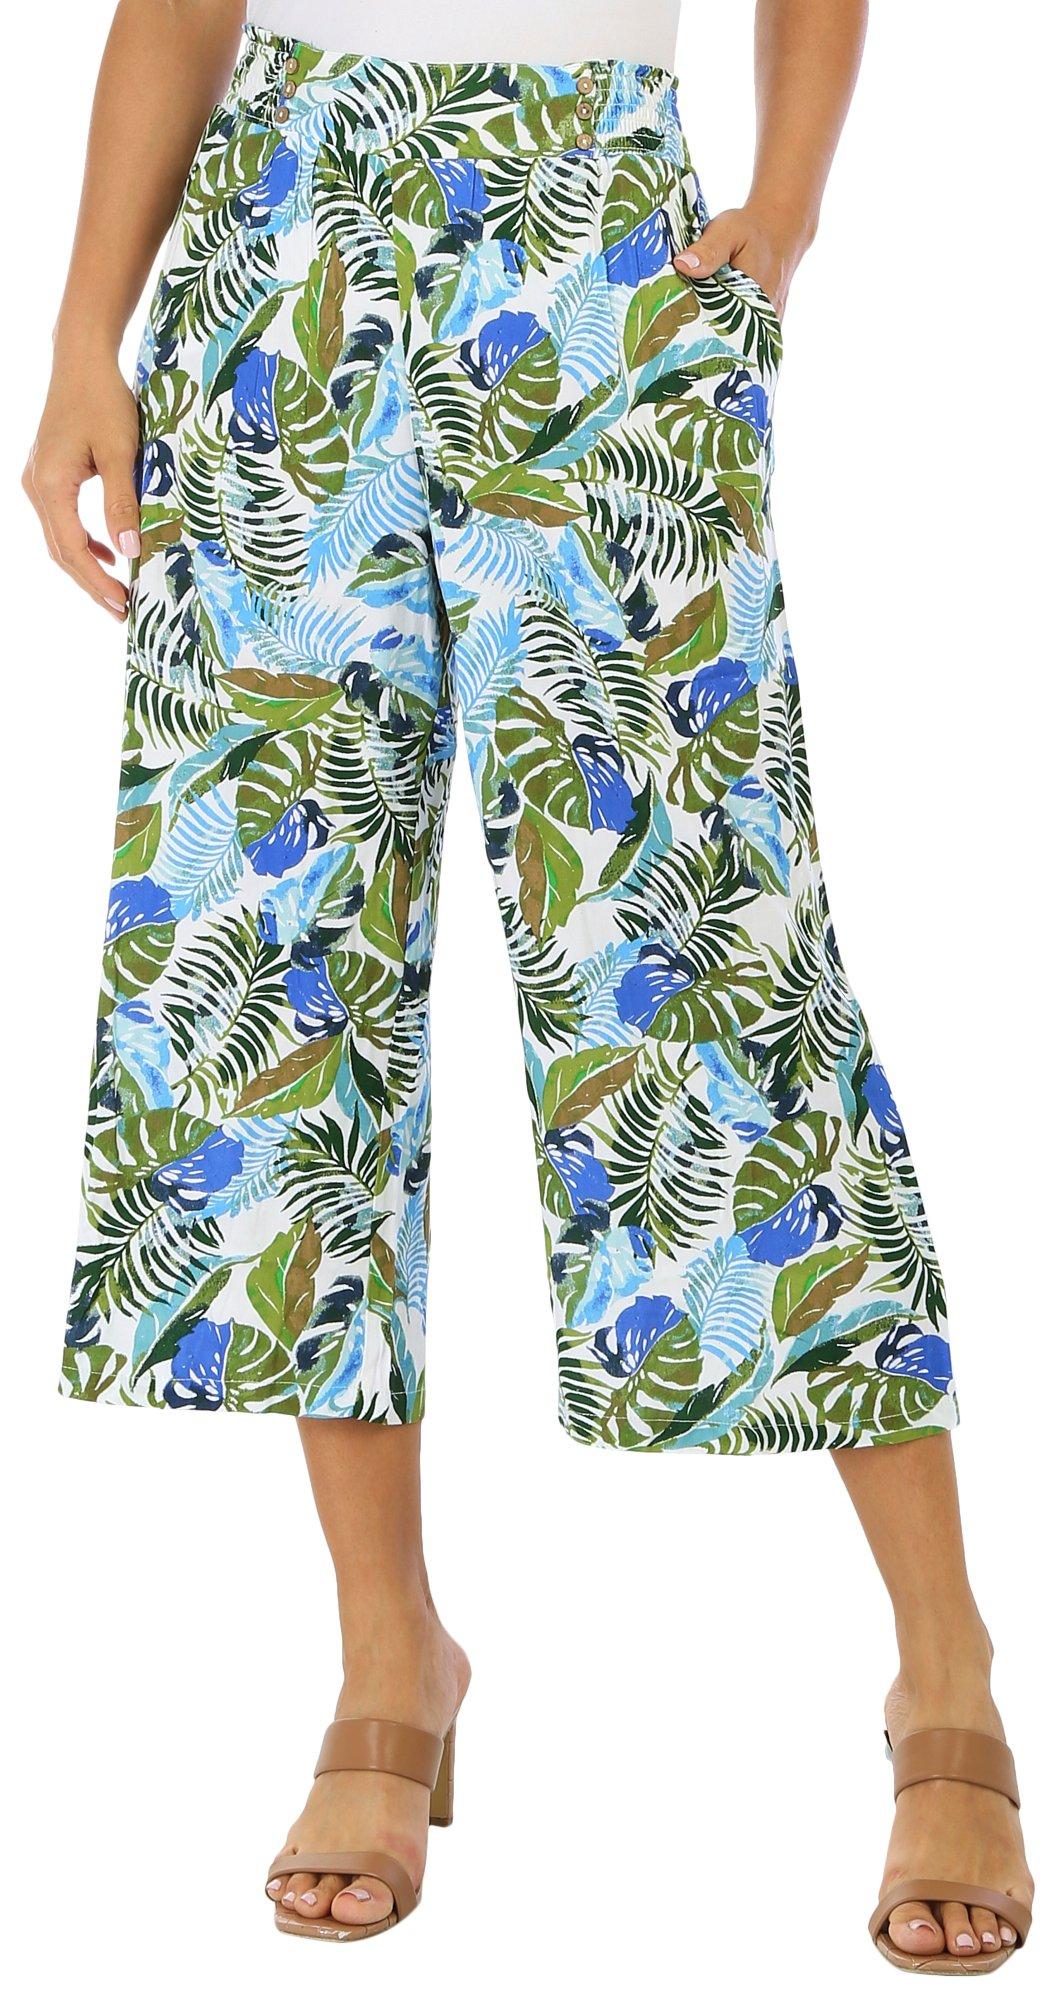 Womens 22 in. Tropical Pull On Capris